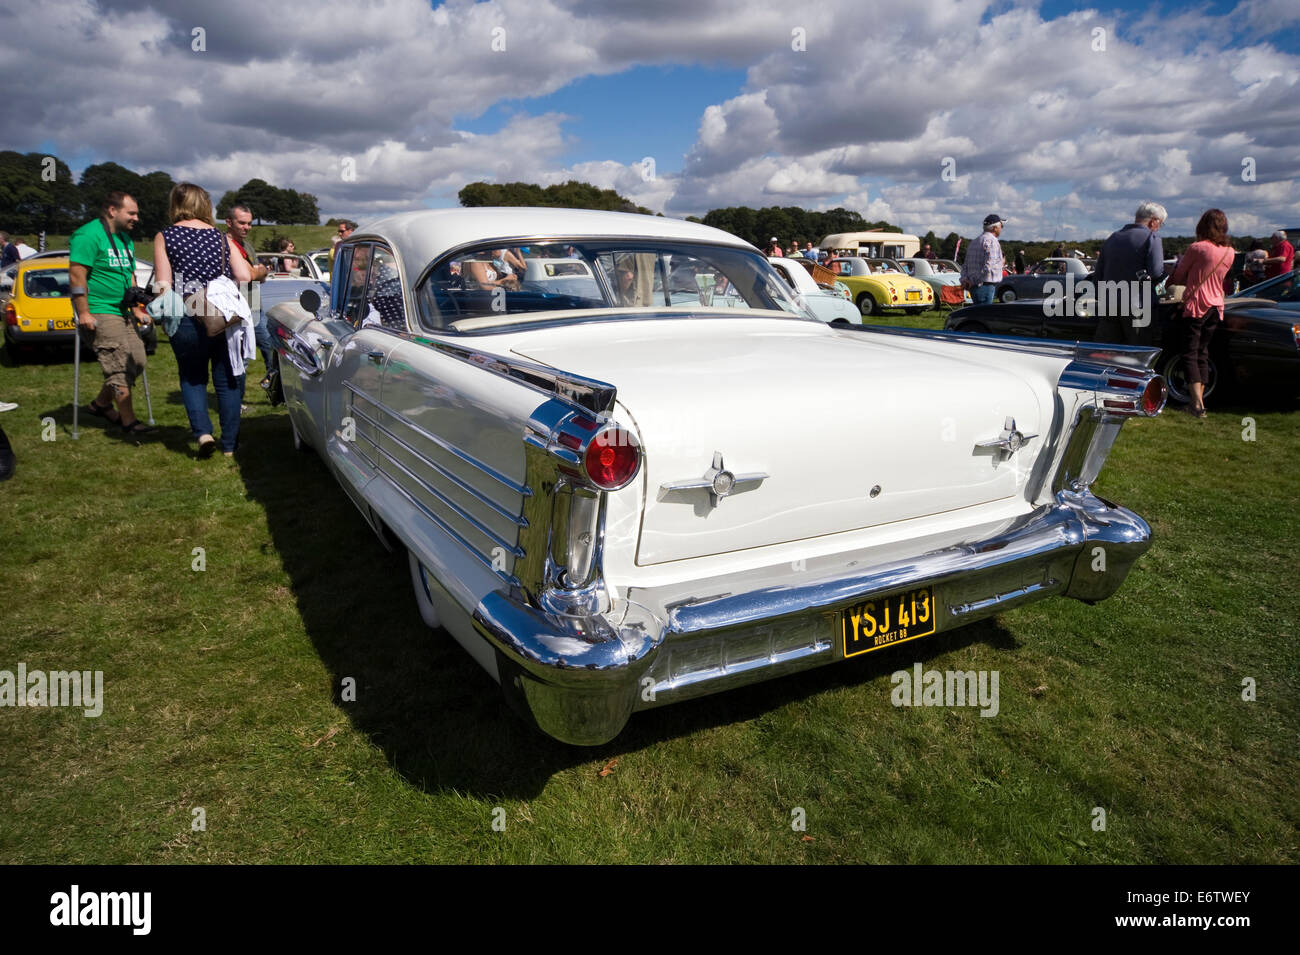 Wentworth, Yorkshire, UK. 31st Aug, 2014. Crowds gather for the Wentworth Wood House Vintage car show 31/08/2014 Credit:  Terry Foster/Alamy Live News Stock Photo